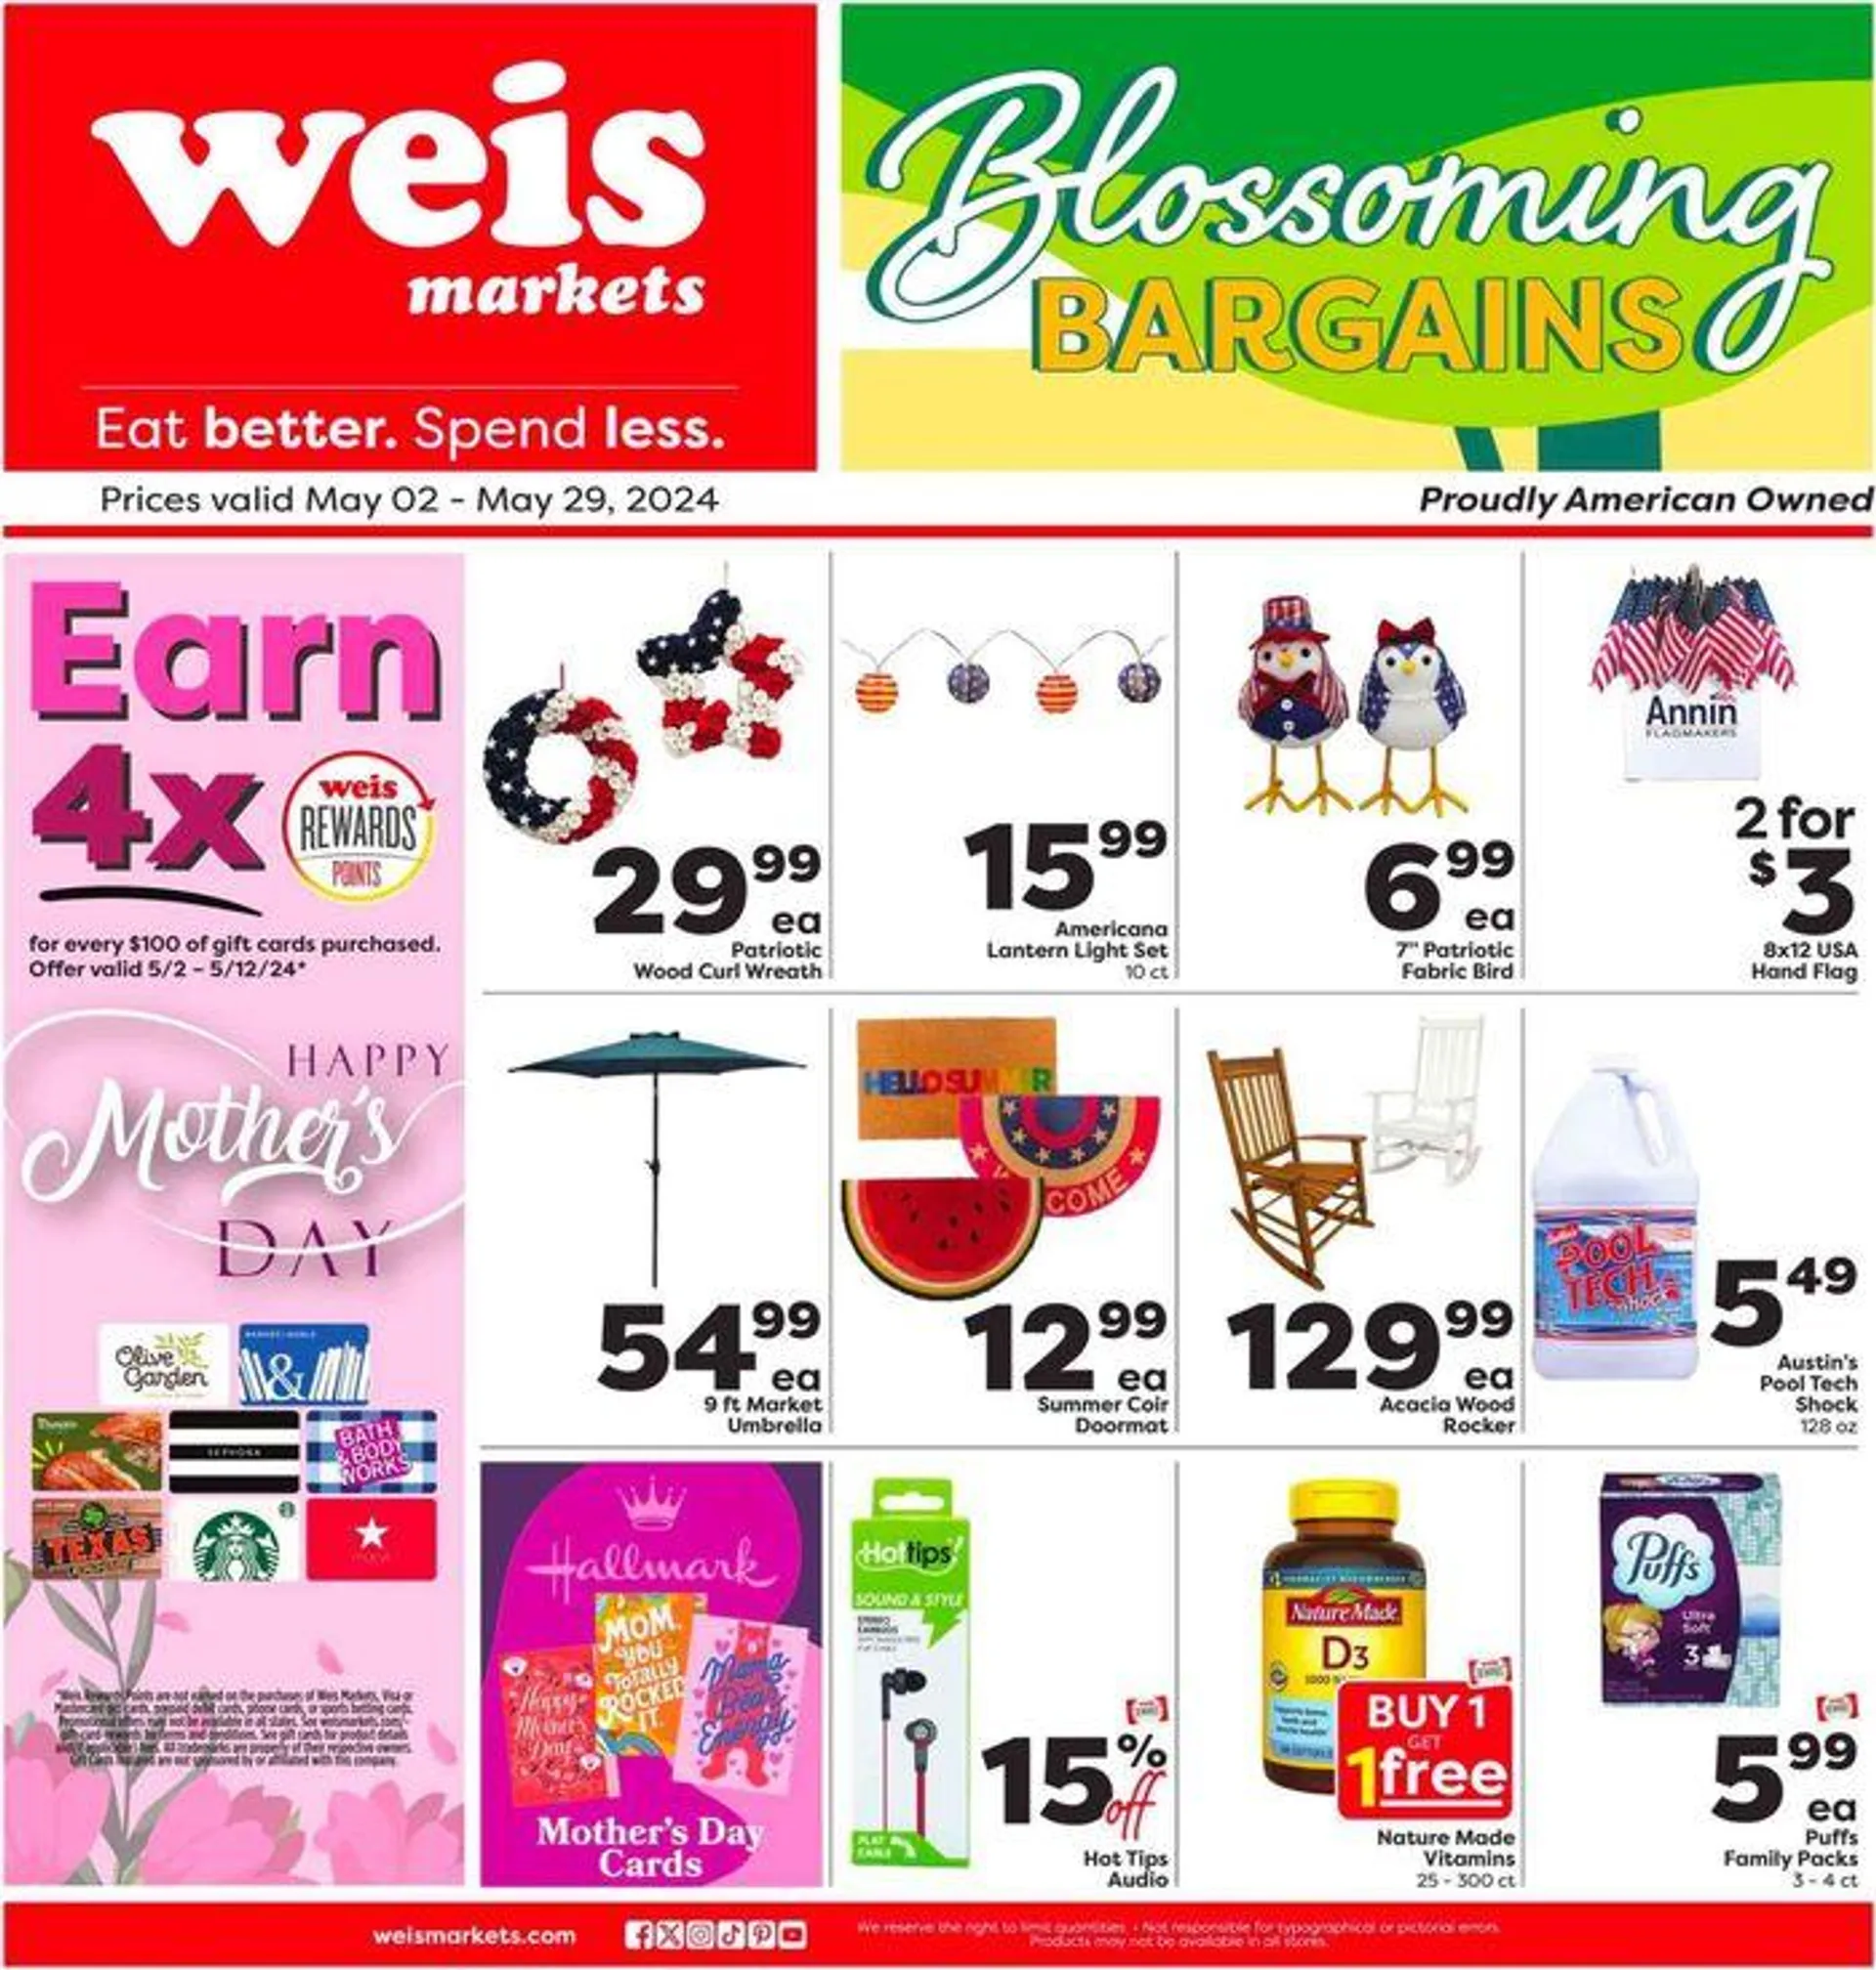 Blossoming Bargains - 1